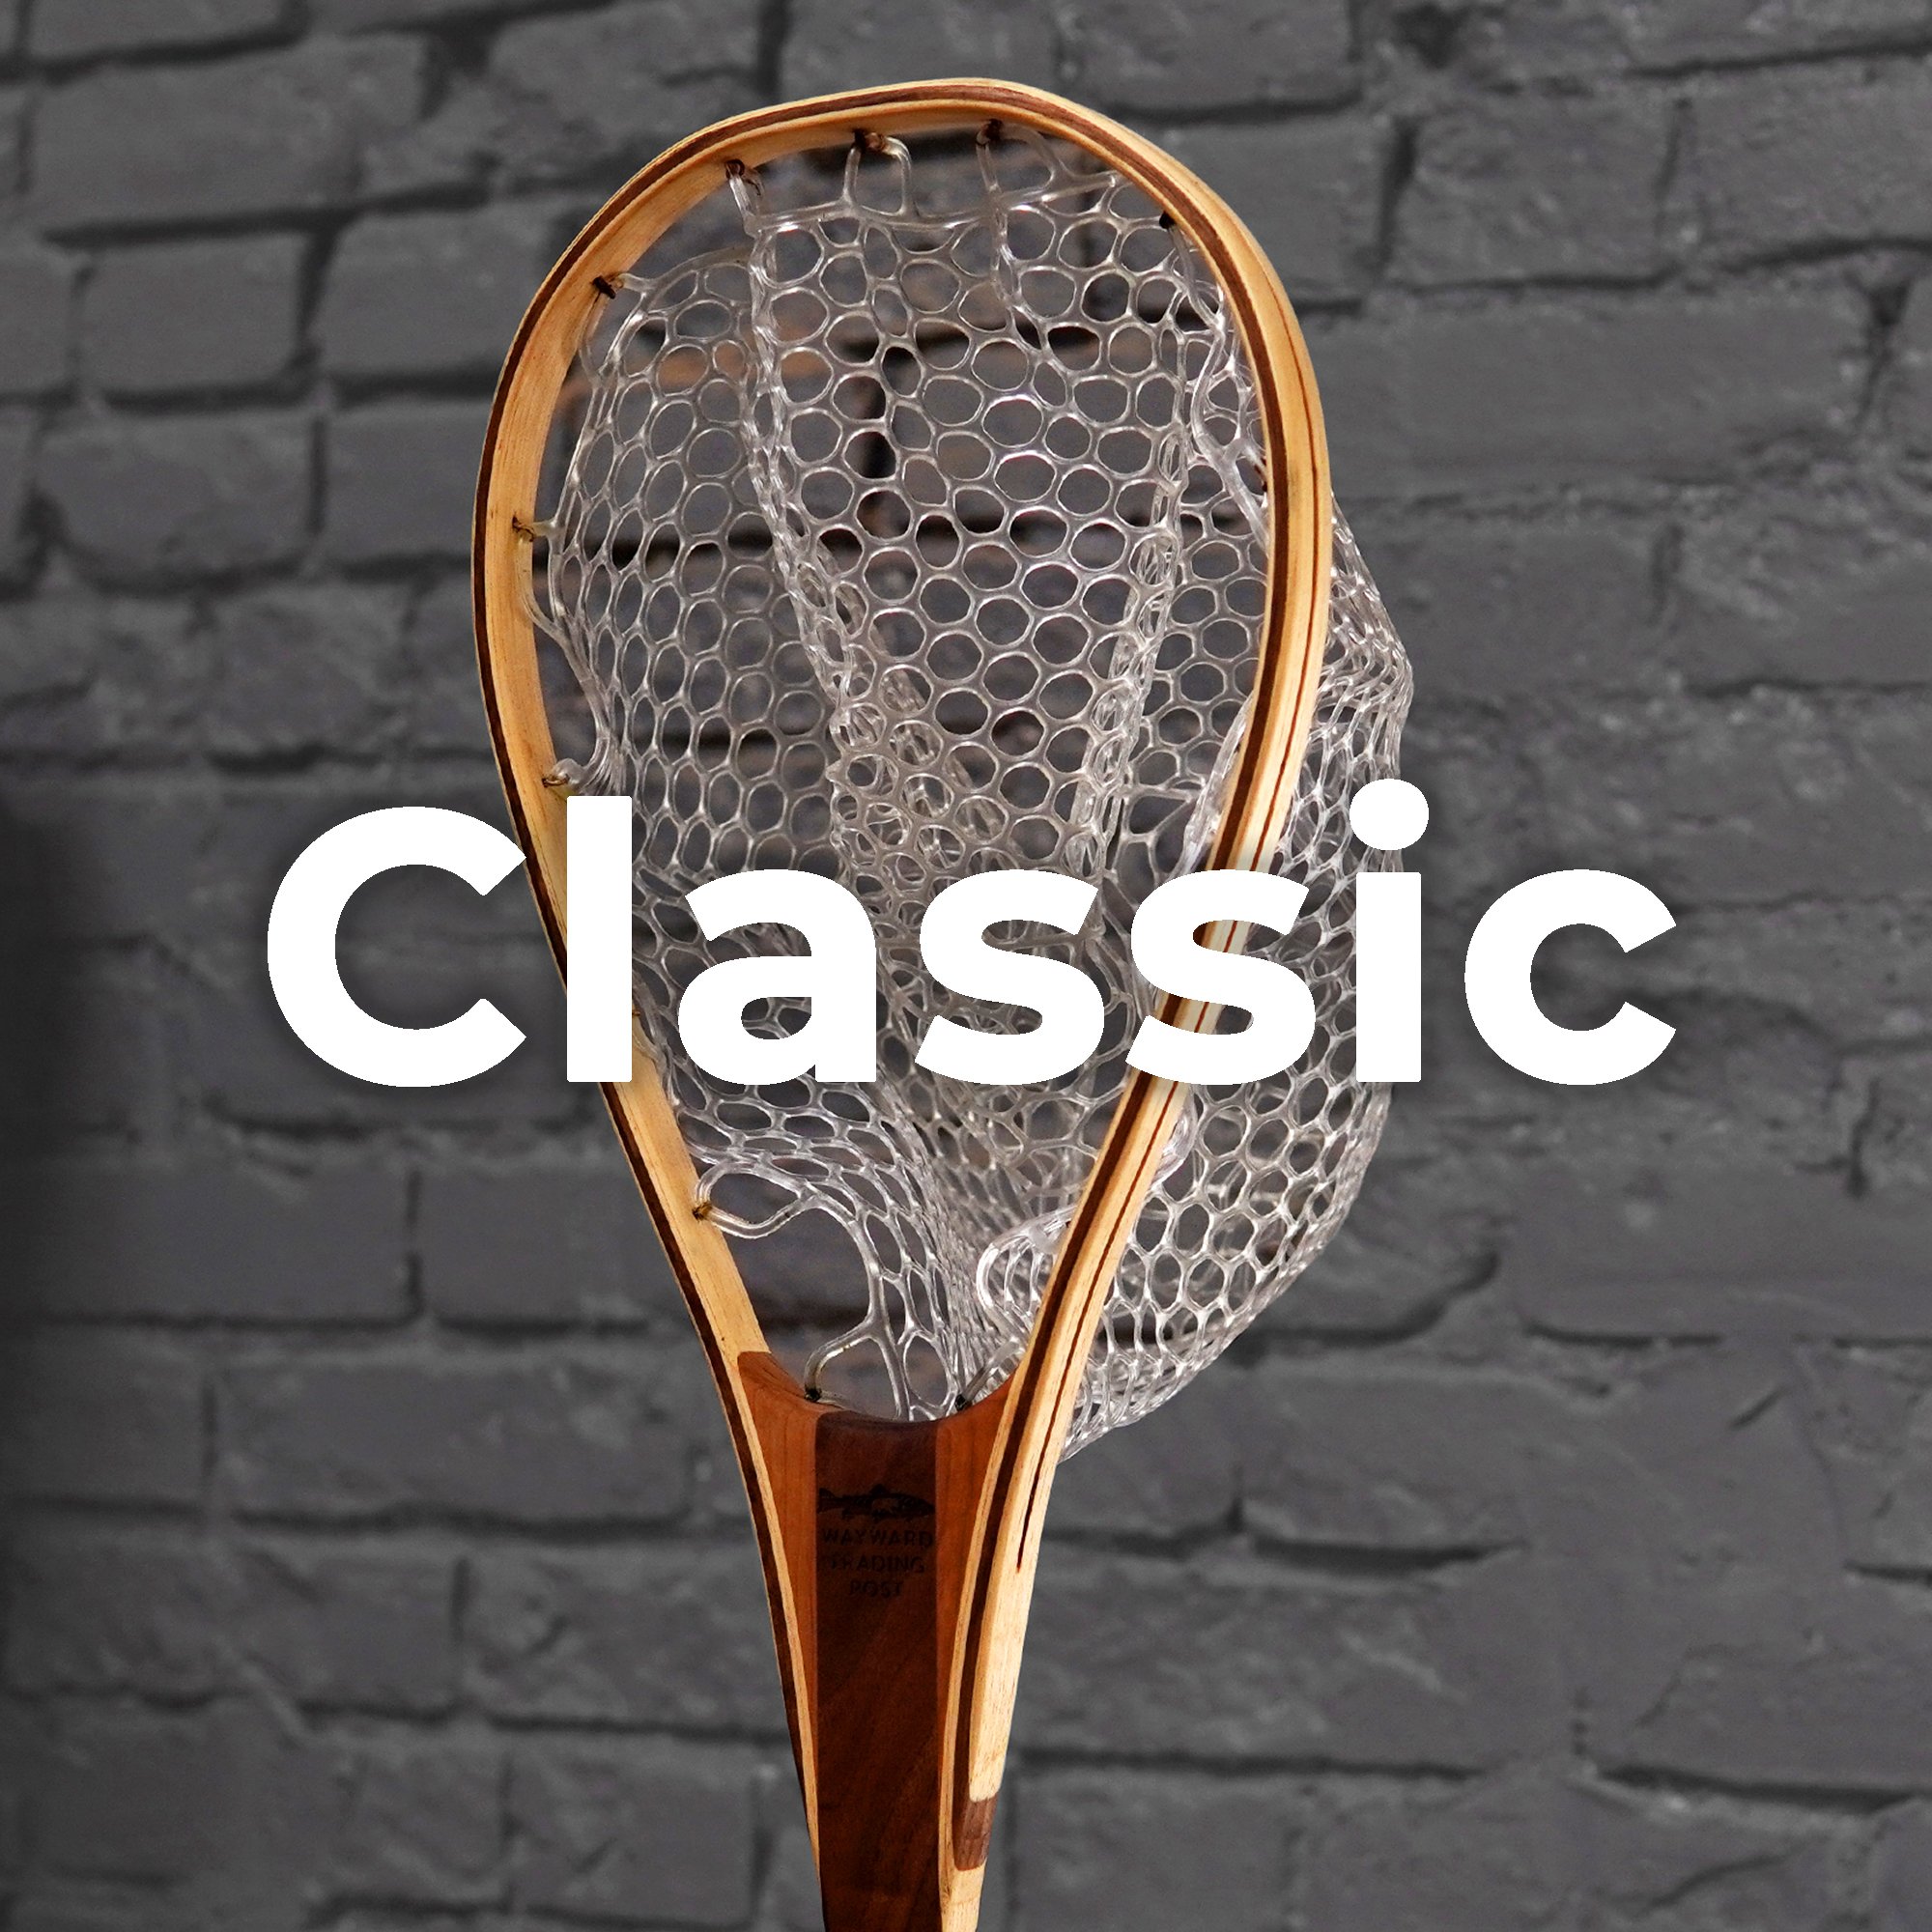 Classic Handcrafted Wood Landing Nets for Trout Fishing and Fly Fishing — Wayward  Handcrafted Fly Fishing Gear - made in Philadelphia USAWood Fly Fishing net  - Handcrafted Custom Fly Fishing net made